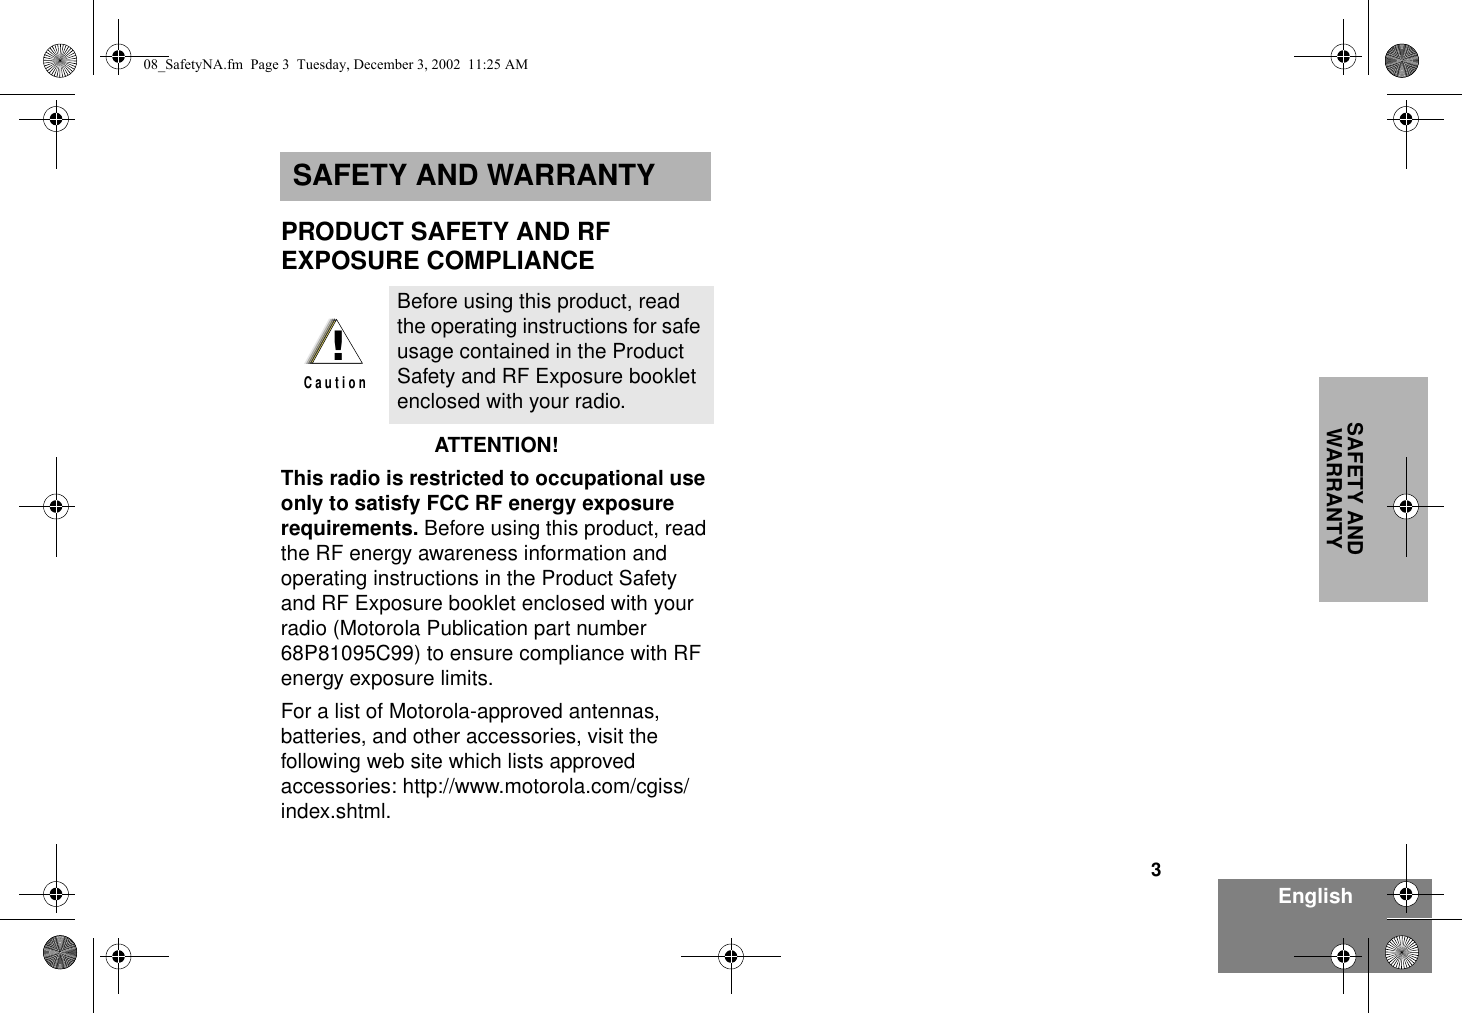 3EnglishSAFETY AND WARRANTYSAFETY AND WARRANTYPRODUCT SAFETY AND RF EXPOSURE COMPLIANCEATTENTION!  This radio is restricted to occupational use only to satisfy FCC RF energy exposure requirements. Before using this product, read the RF energy awareness information and operating instructions in the Product Safety and RF Exposure booklet enclosed with your radio (Motorola Publication part number 68P81095C99) to ensure compliance with RF energy exposure limits.  For a list of Motorola-approved antennas, batteries, and other accessories, visit the following web site which lists approved accessories: http://www.motorola.com/cgiss/index.shtml.Before using this product, read the operating instructions for safe usage contained in the Product Safety and RF Exposure booklet enclosed with your radio.!C a u t i o n08_SafetyNA.fm  Page 3  Tuesday, December 3, 2002  11:25 AM